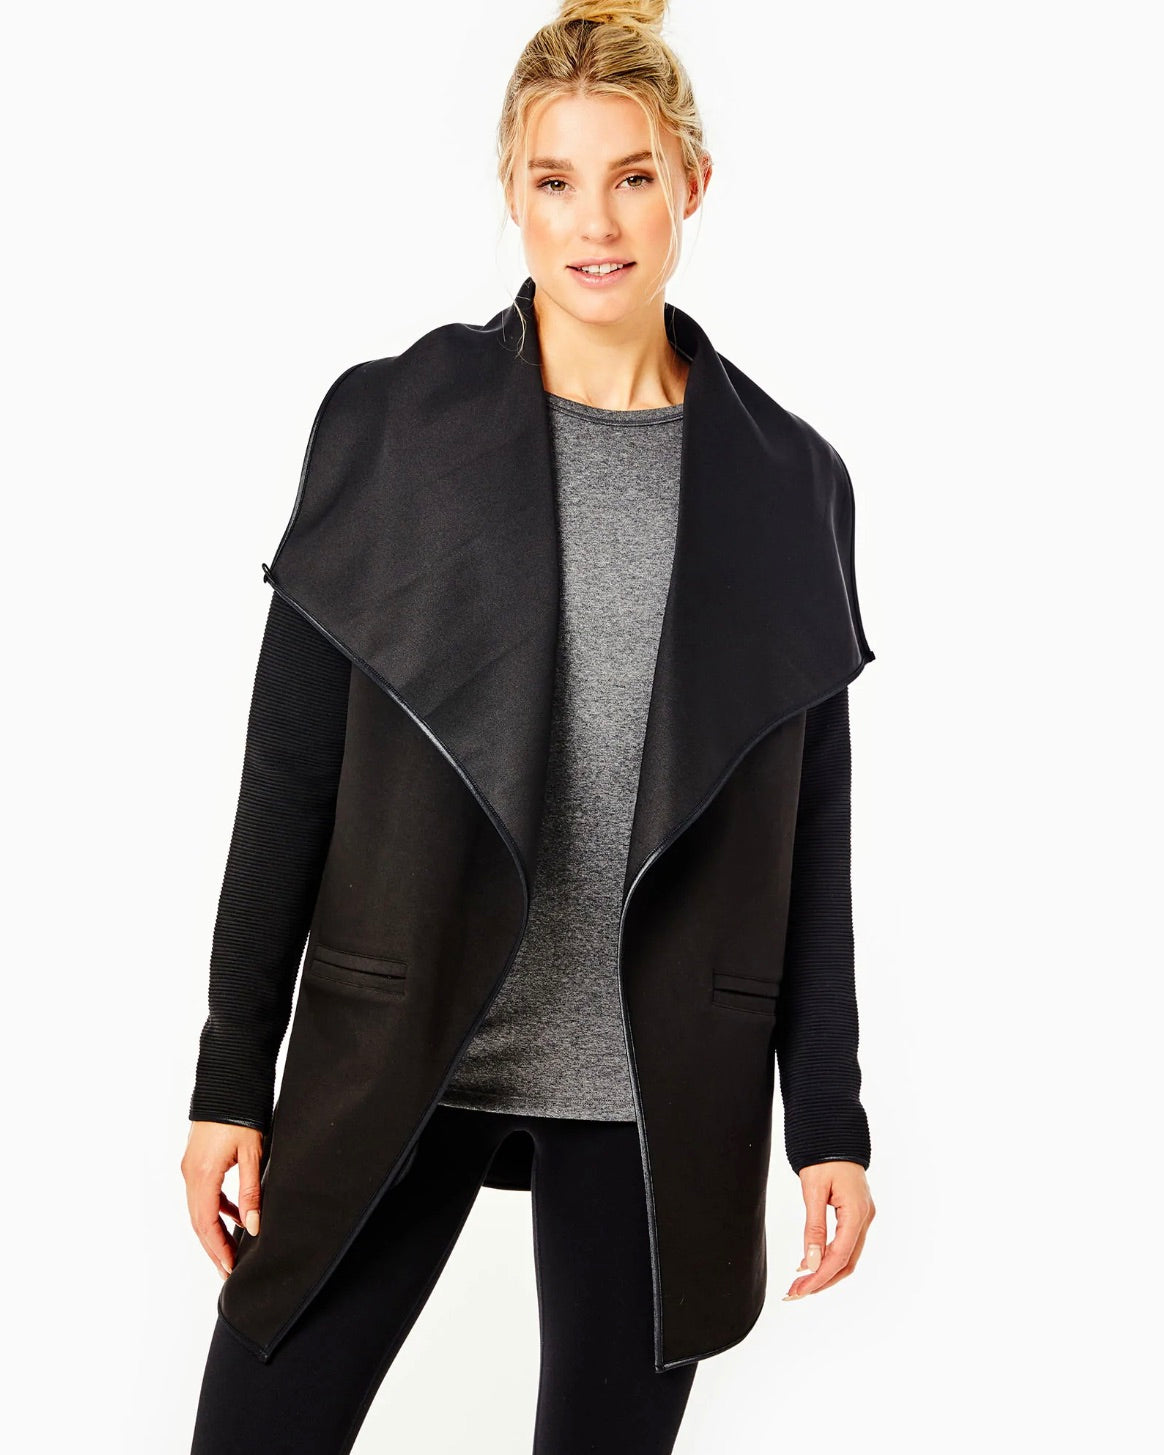 Model wearing Addison Bay The Wrap jacket in Black wearing black leggings and gray shirt on a white background